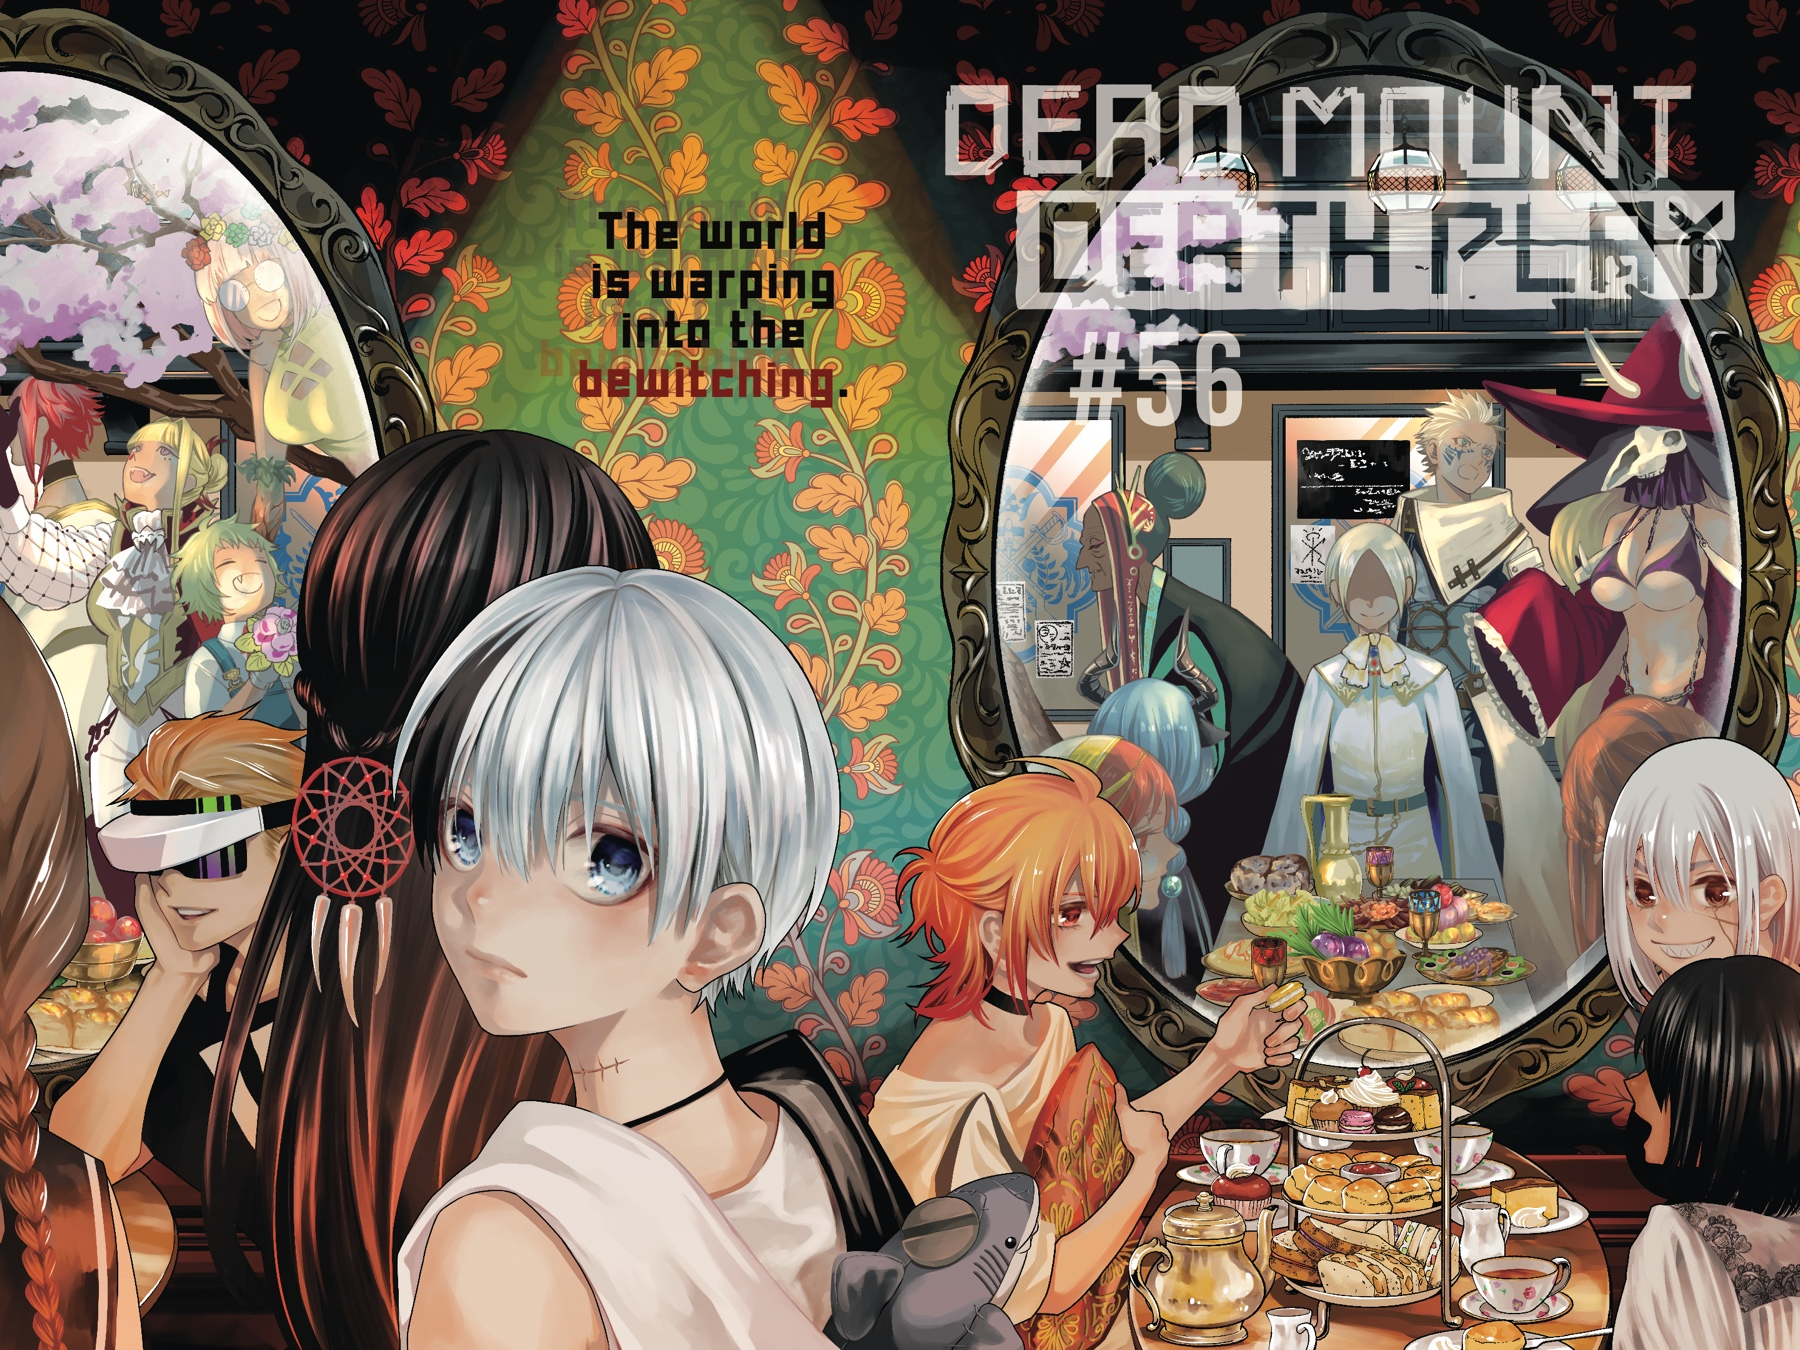 Dead Mount Death Play Manga Gets TV Anime Series in April - QooApp